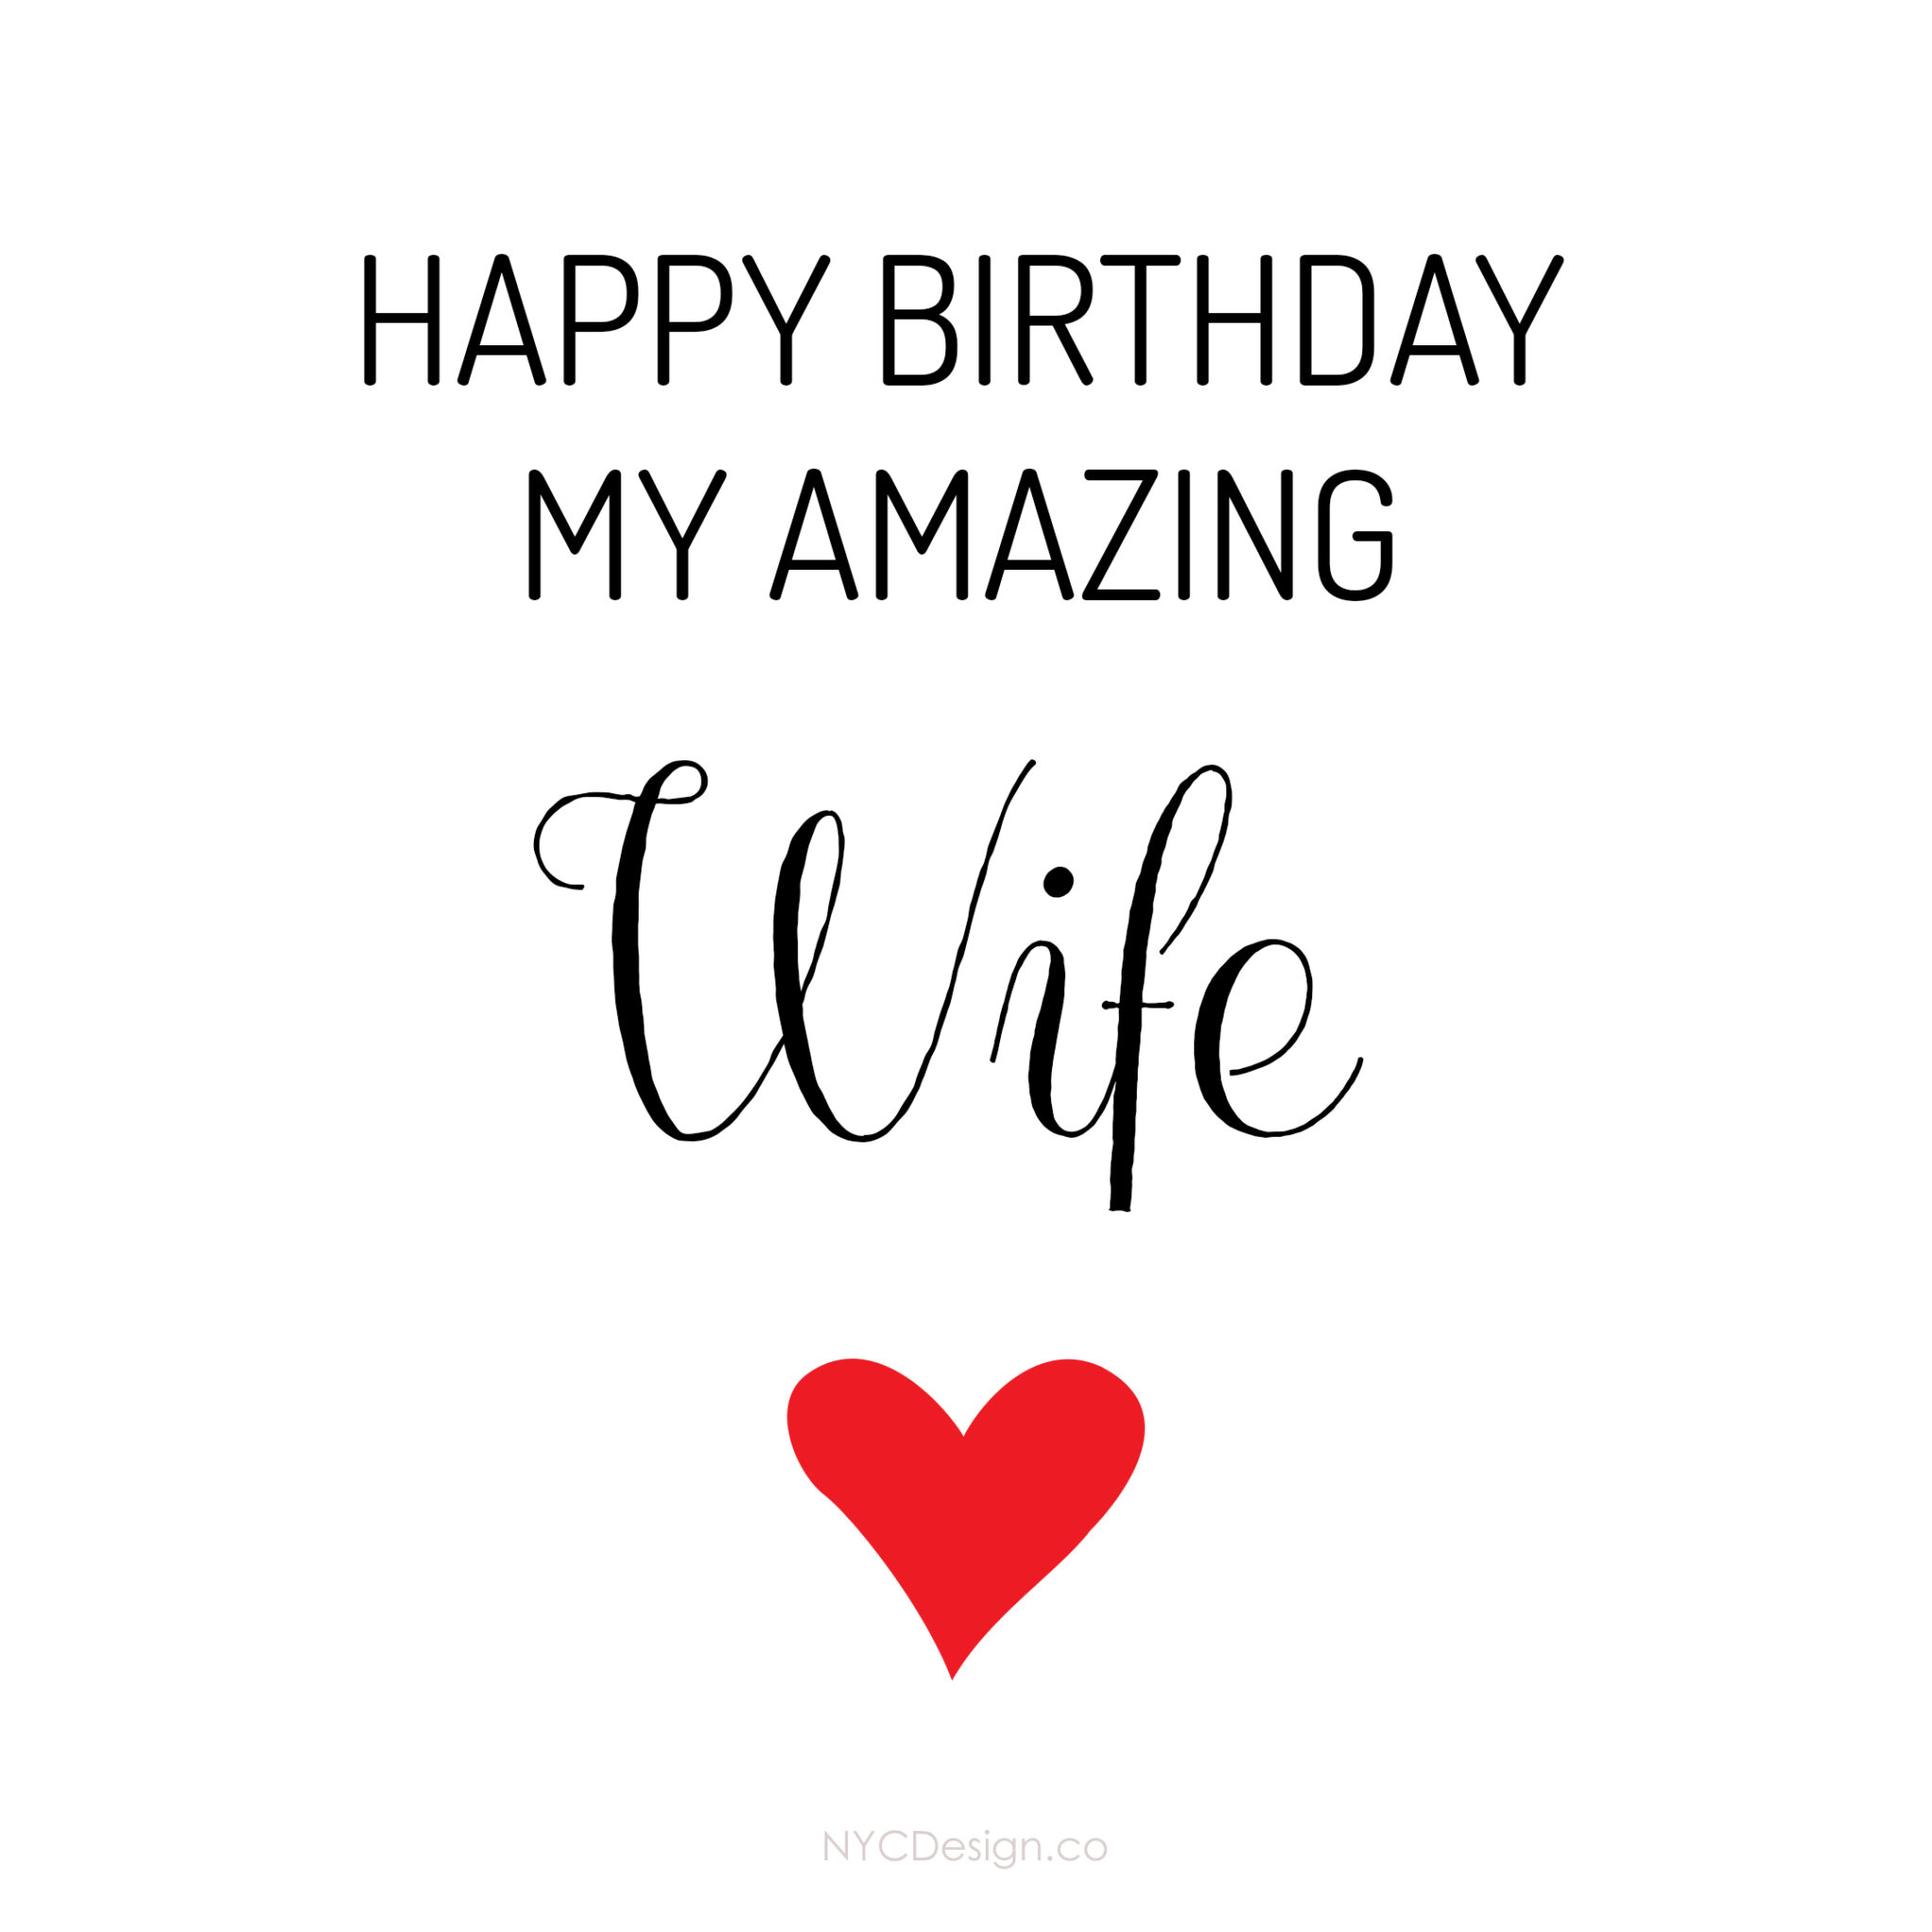 Happy Birthday Card for Wife – NYCDesign.co: Printable Things